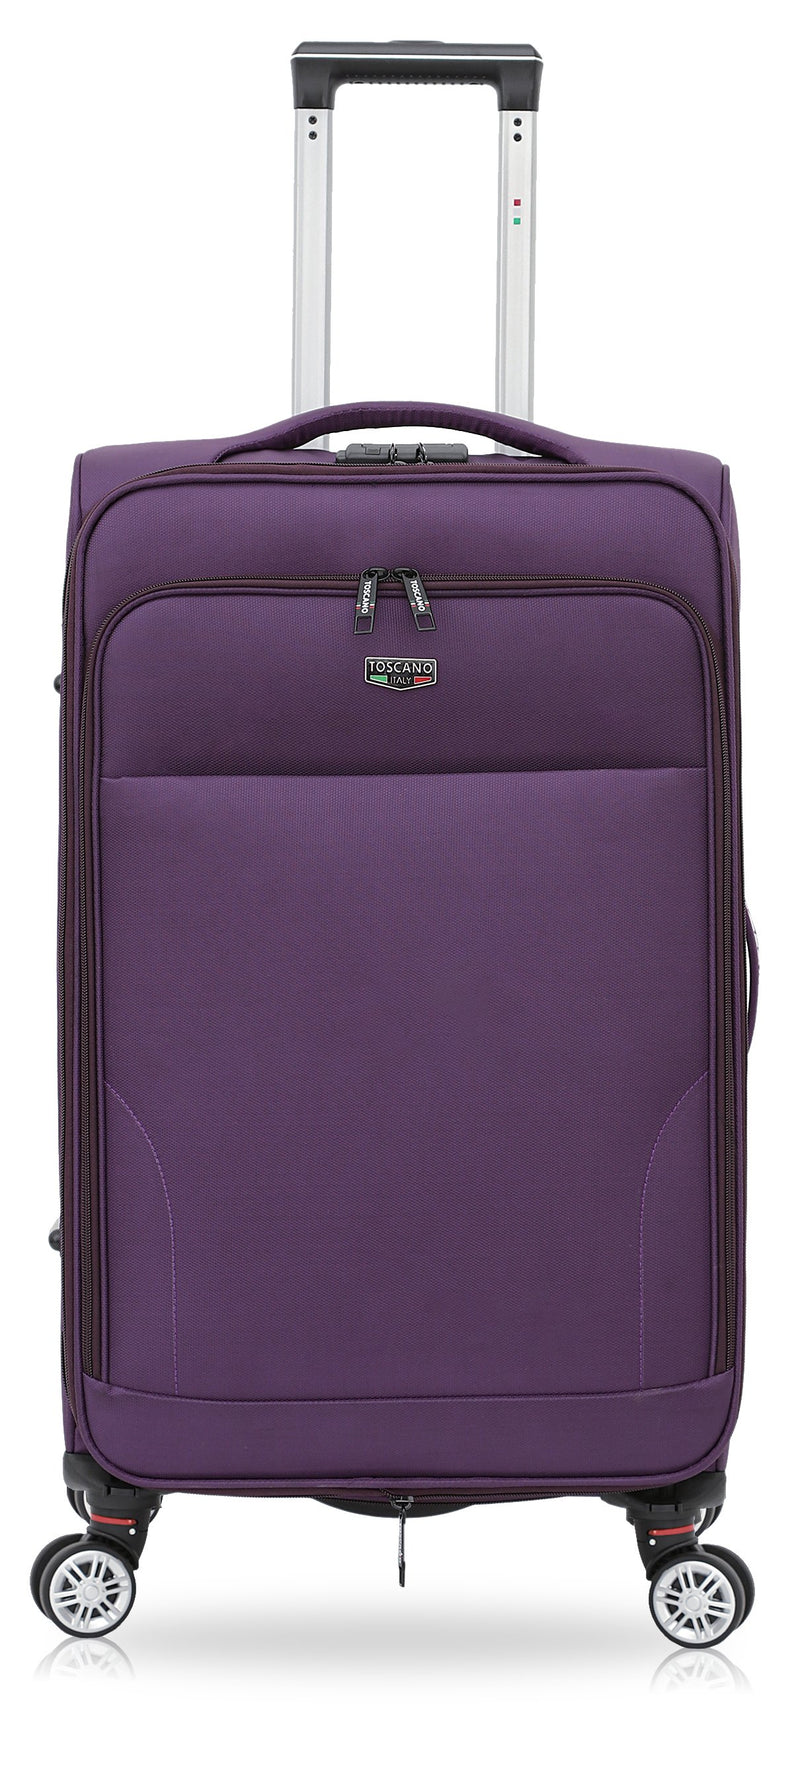 TOSCANO 21-inch Ricerca Lightweight Carry On  Luggage Suitcase